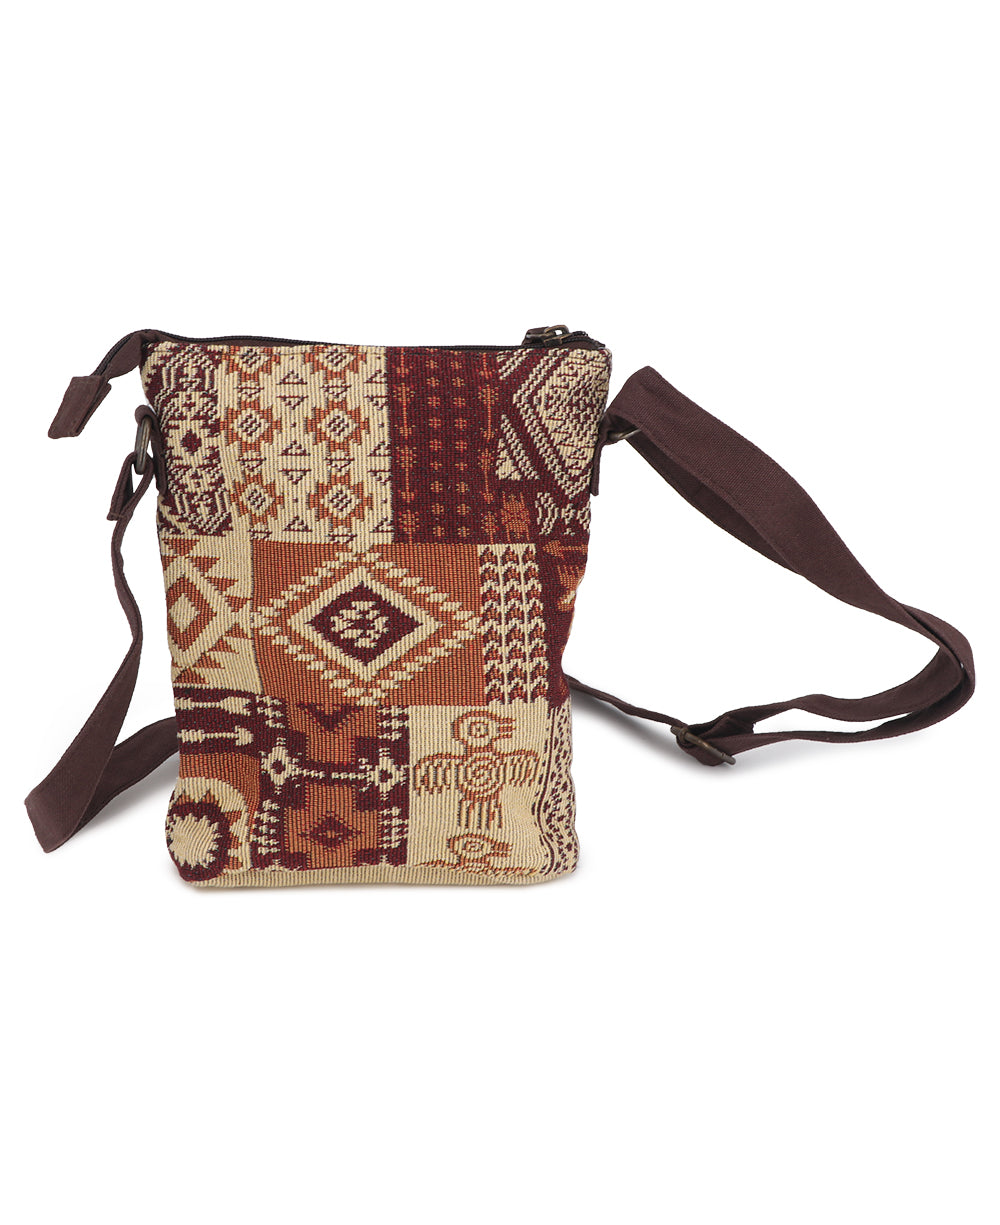 Hipster Ipad Green Eco-Friendly Cross Body (Jute) Bag - Buy Hipster Ipad  Green Eco-Friendly Cross Body (Jute) Bag Online at Low Price in India 